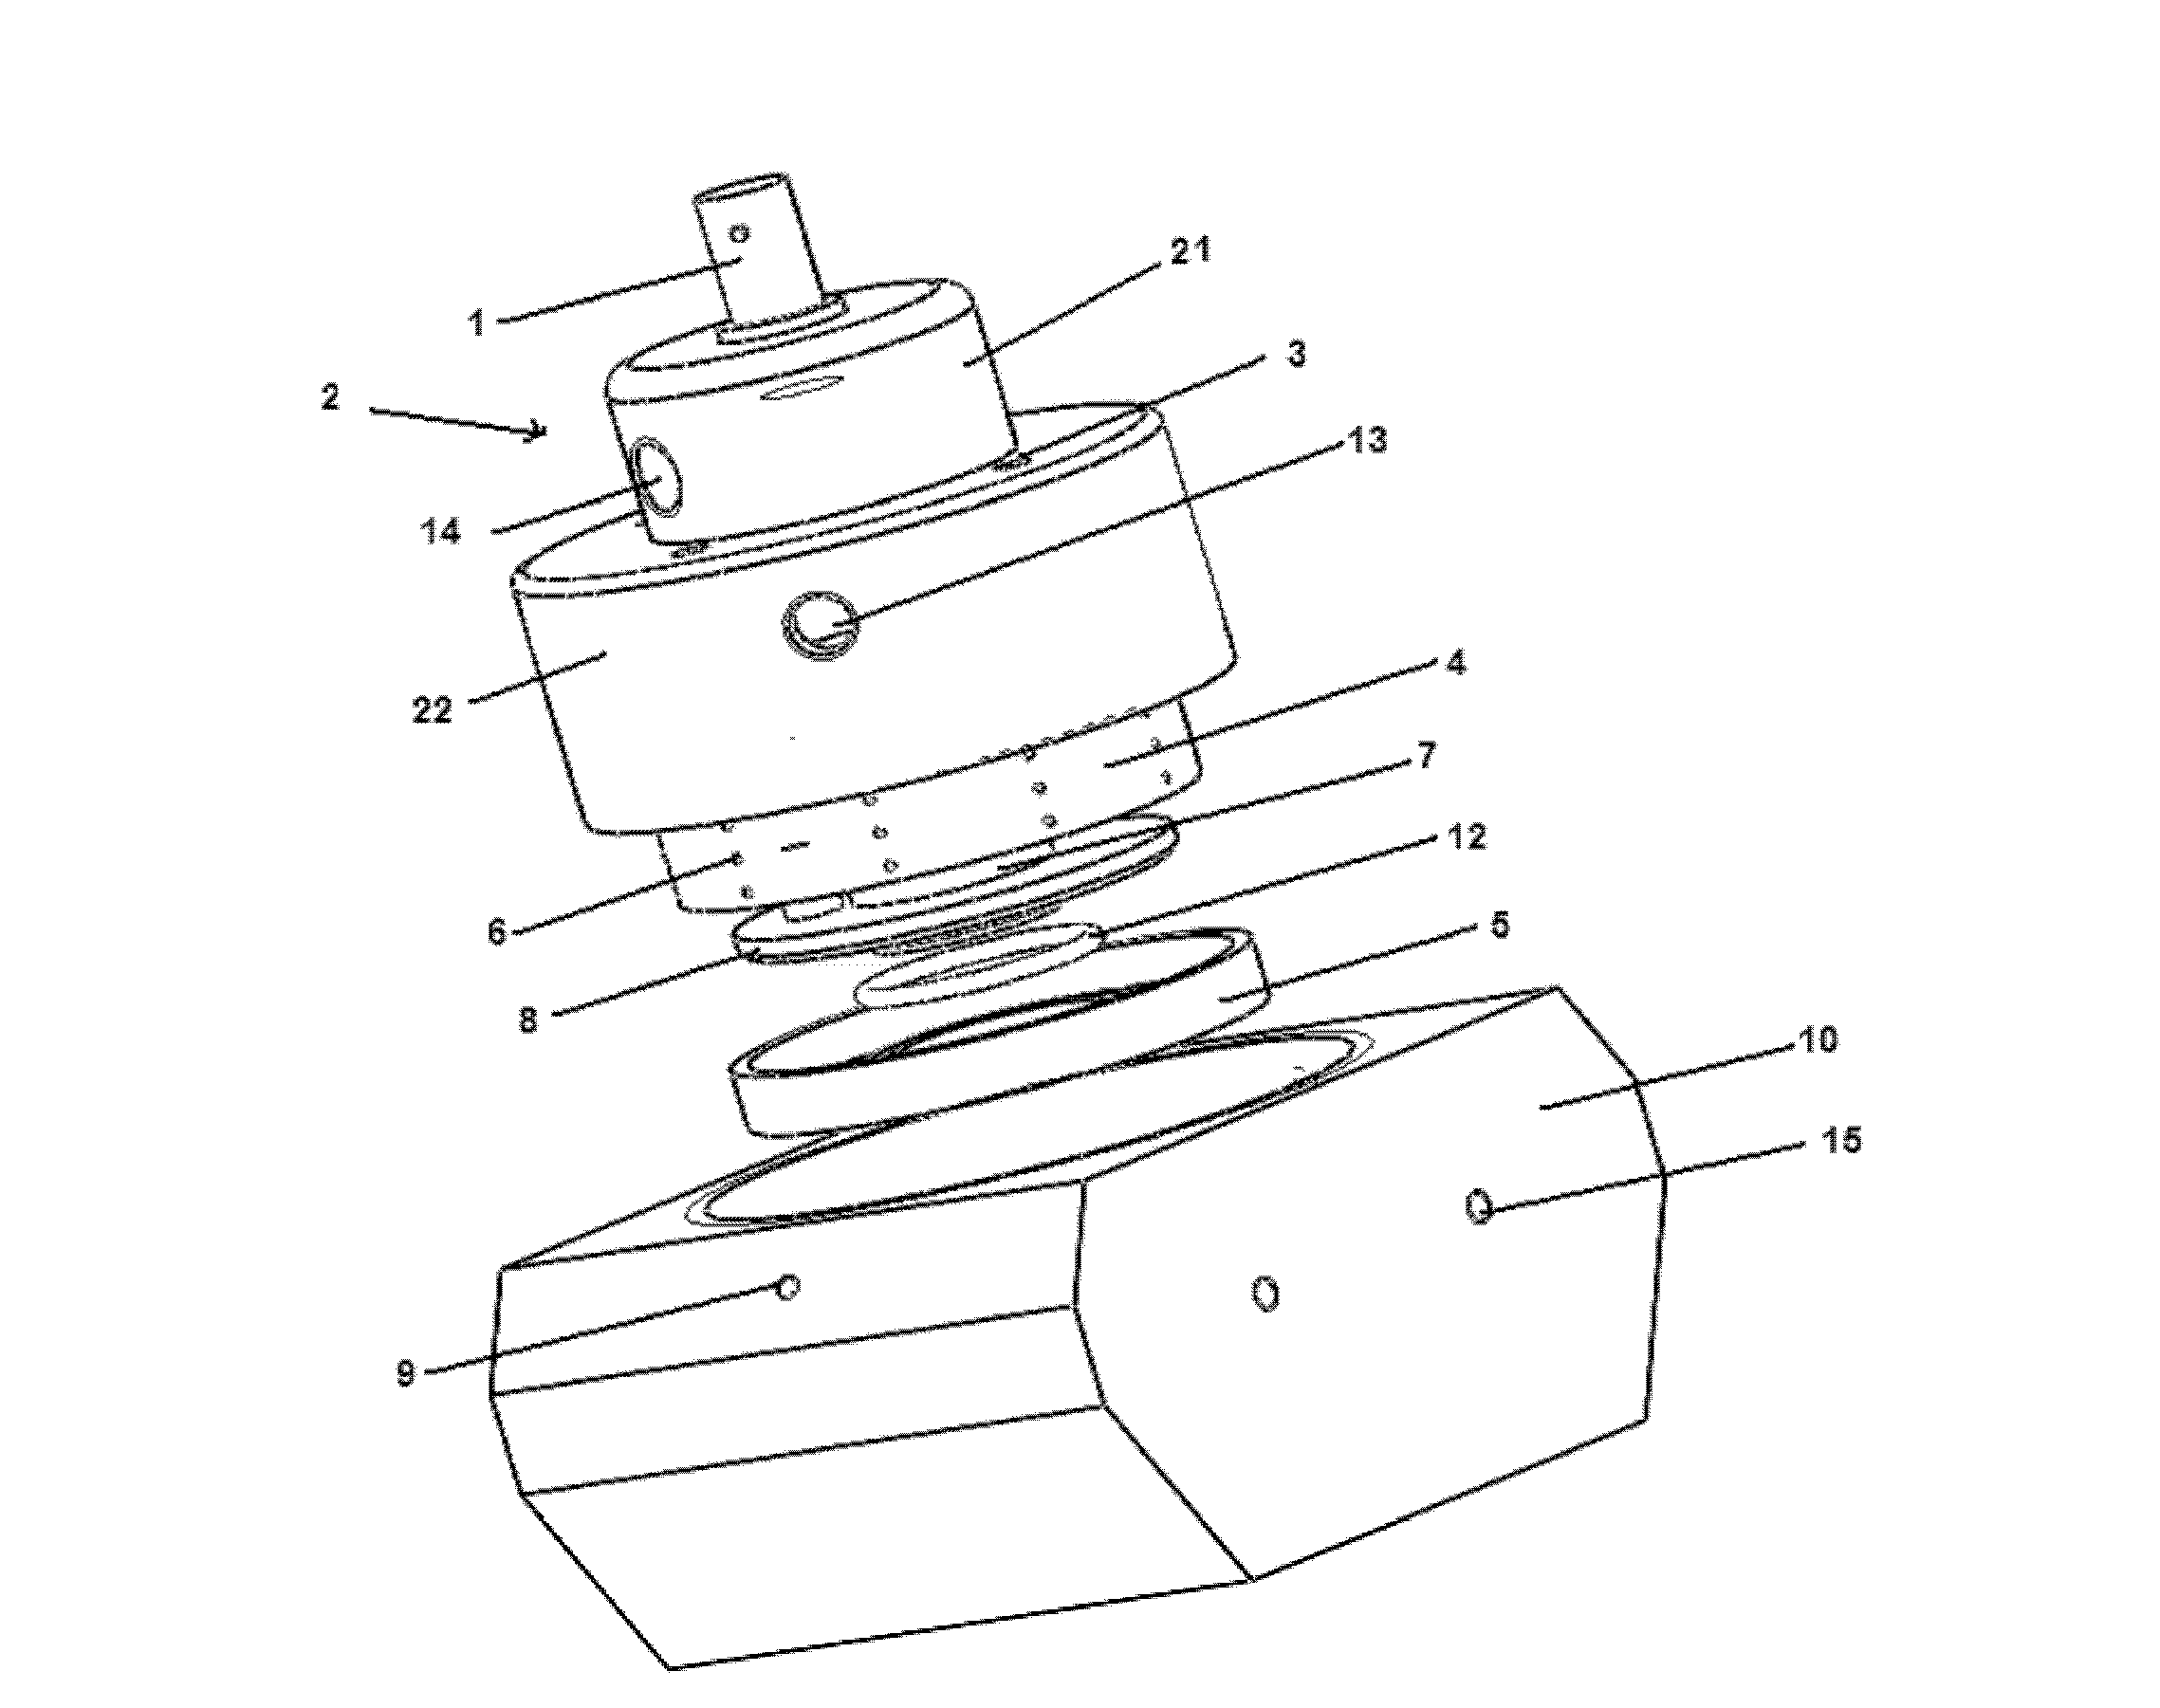 Atomizing jet device for cleaning